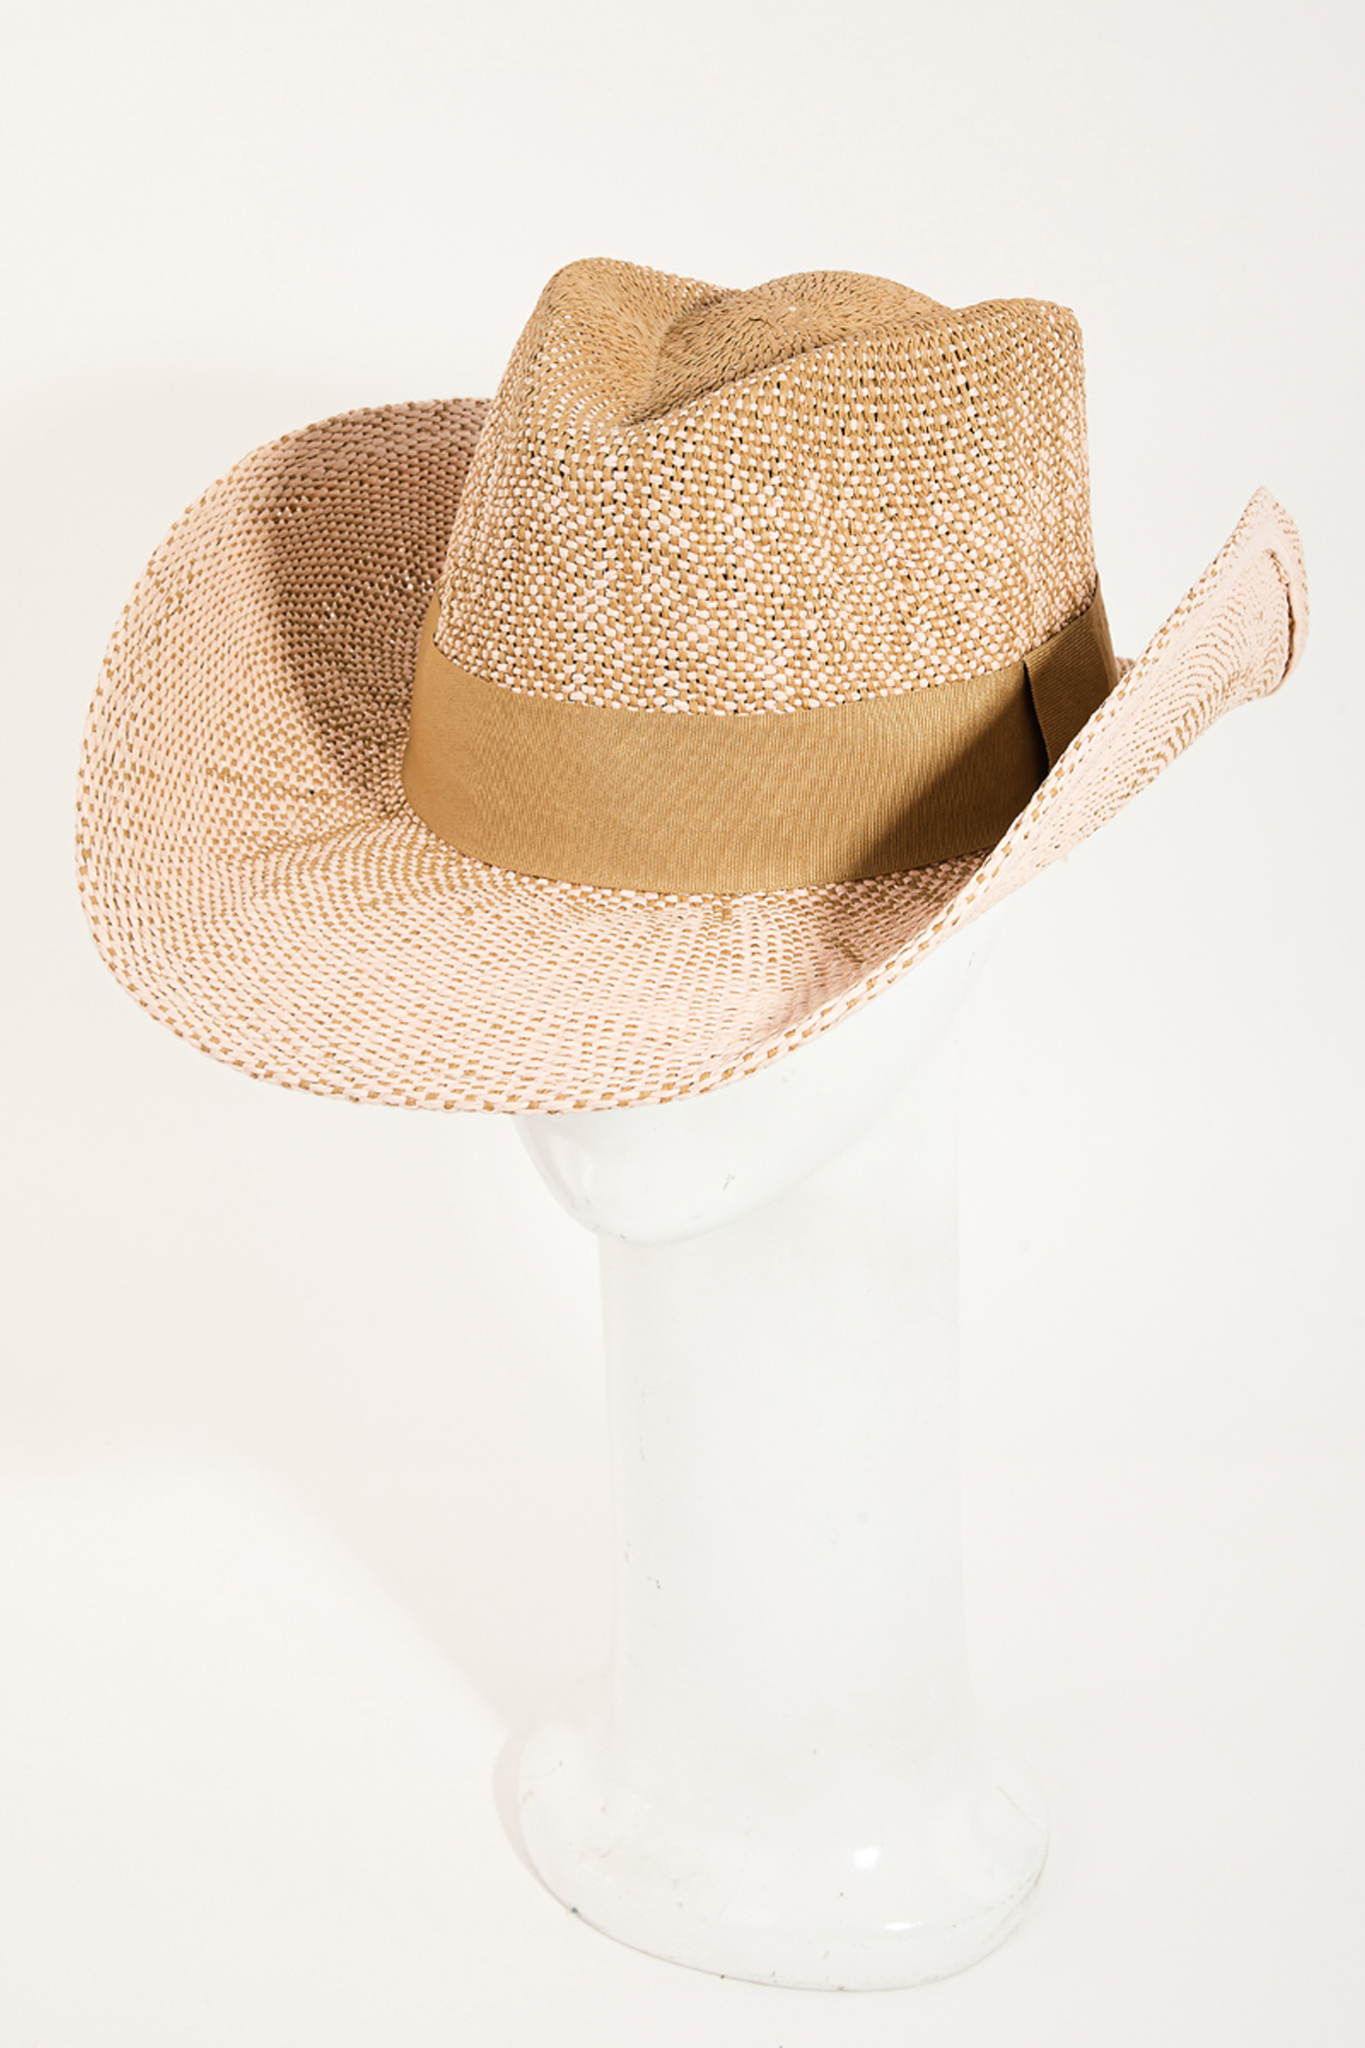 View 1 of Lunan Straw Cowboy Hat in Pink, a Hats from Larrea Cove. Detail: 
Welcome to Western-chic style with the Lunan S...